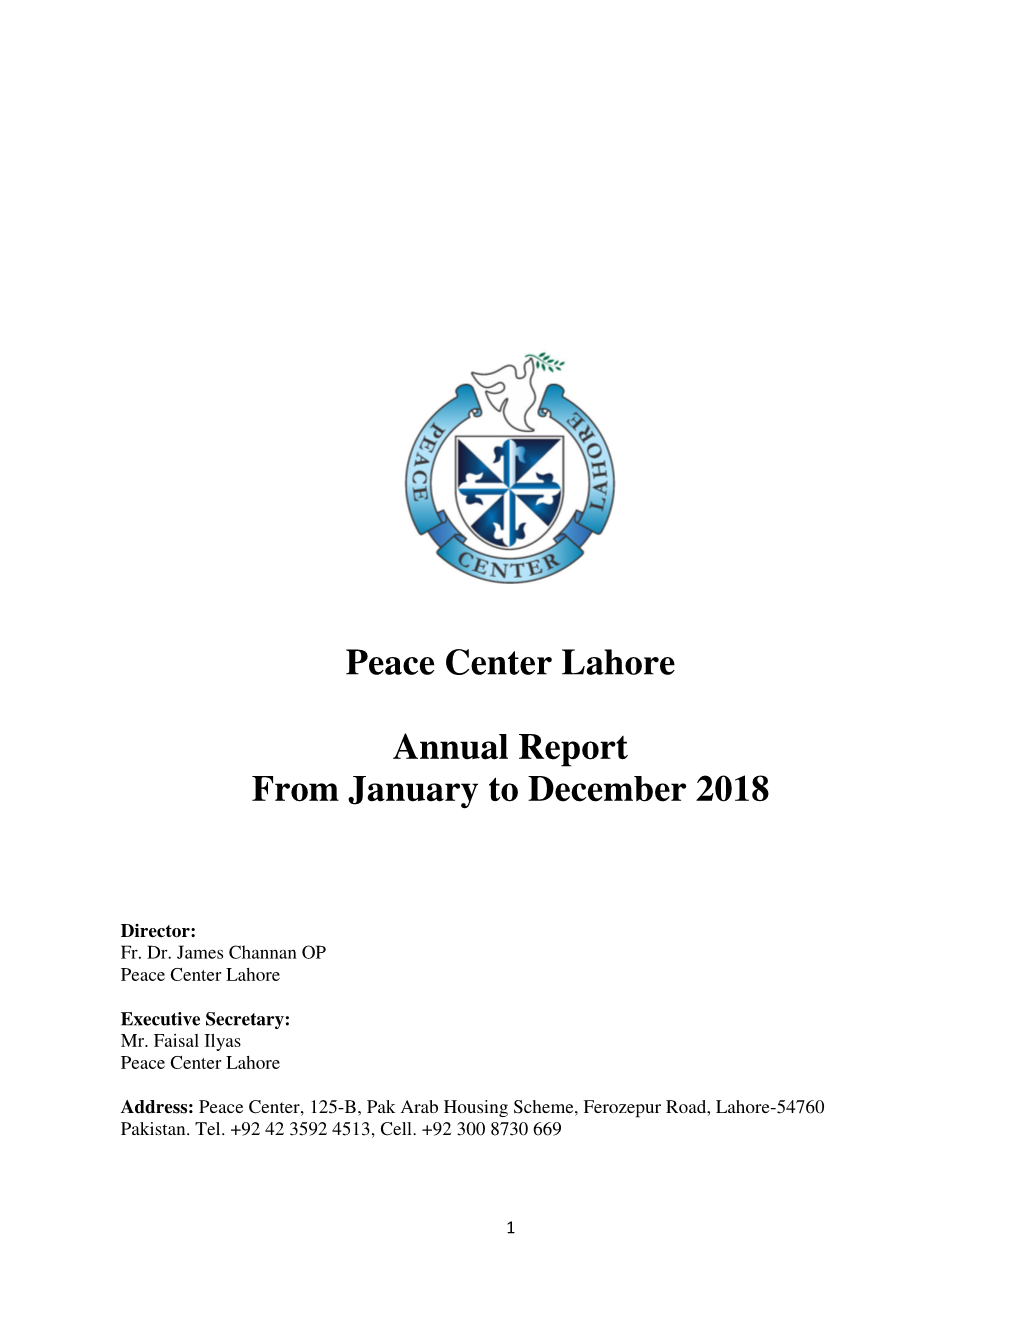 Peace Center Lahore Annual Report from January to December 2018